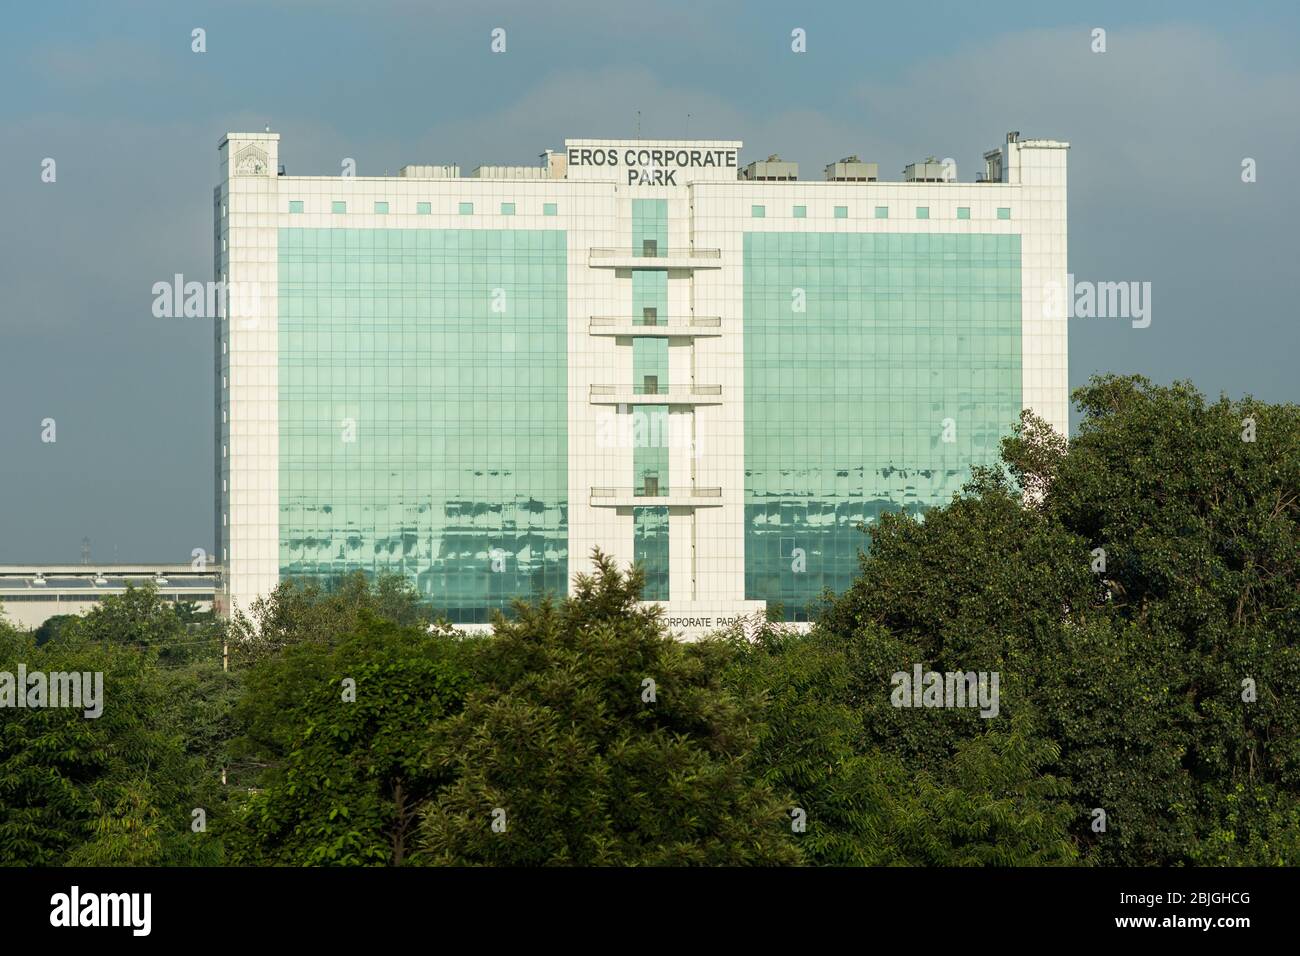 Gurgaon, Haryana / India - September 28, 2019: Eros Corporate Park new commercial and office complex in Gurgaon, India Stock Photo